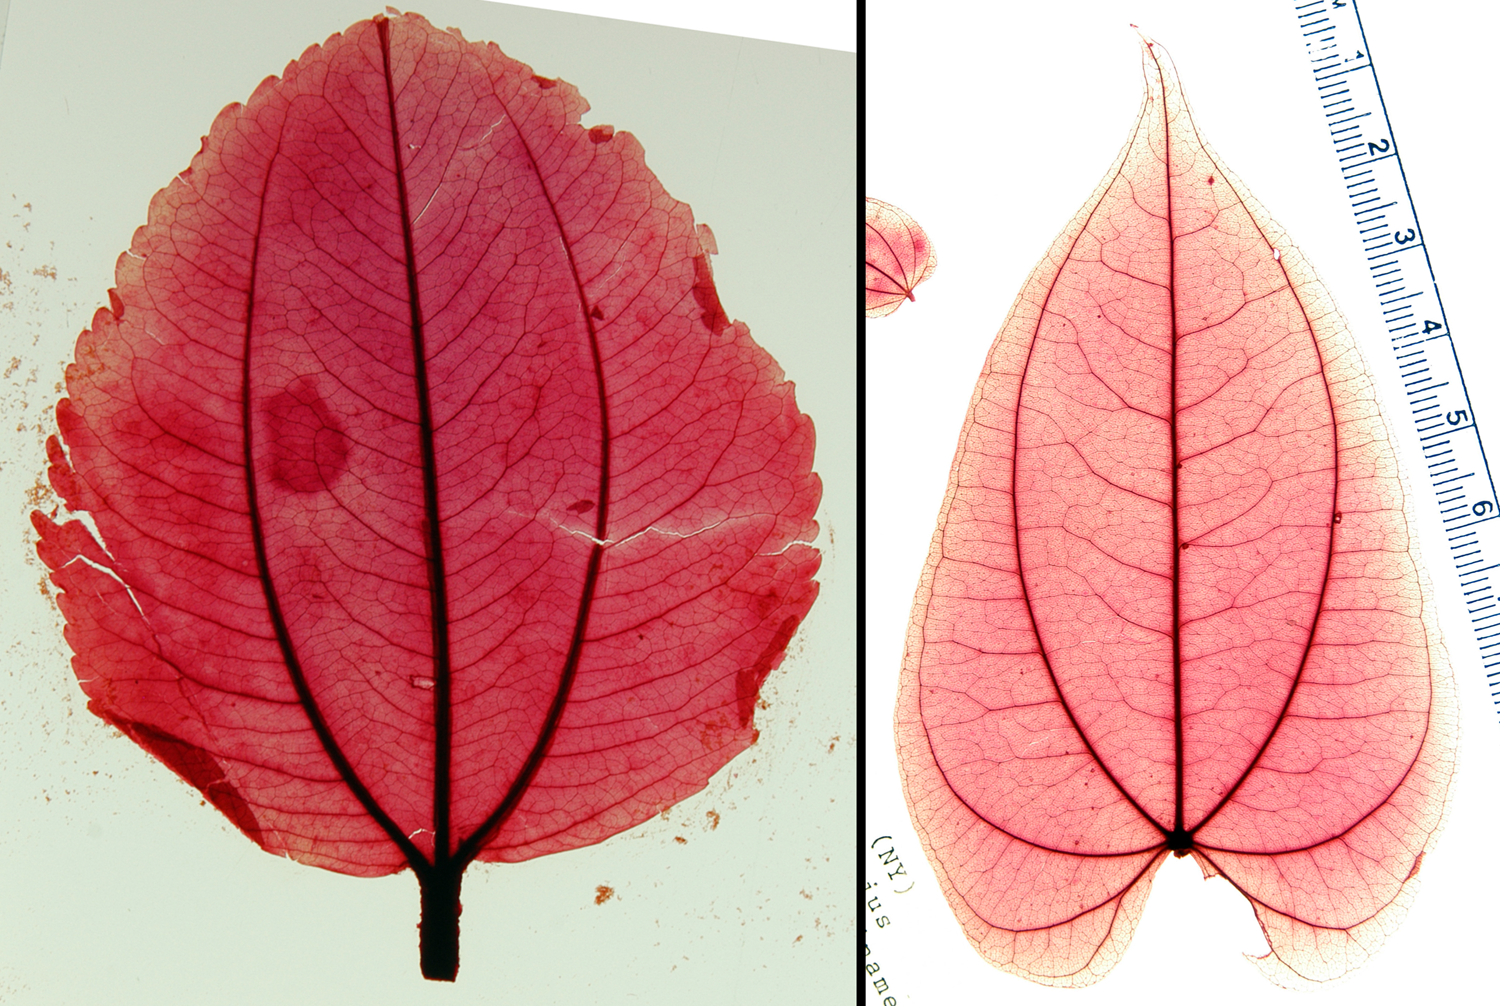 2-Panel photographic figure. Panel 1: Leaf of paliurus with three major veins emerging from the leaf base, the lateral veins curving outward and converging at the apex. Panel 2: Leaf of yam with major veins emerging from the base, the lateral veins curving toward the leaf base before converging toward the leaf apex.